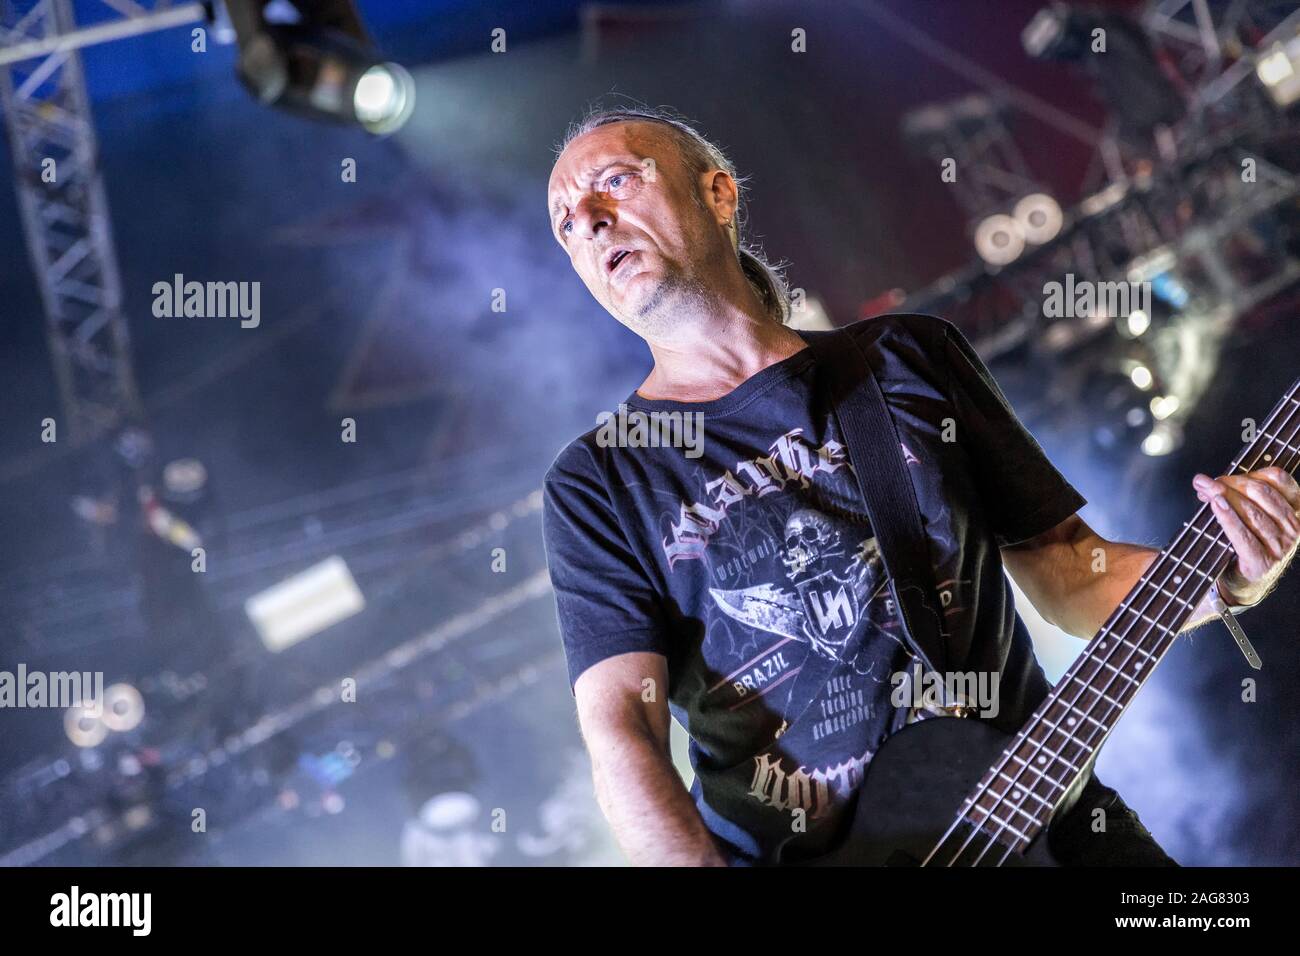 Oslo, Norway. 28th, June 2019. The Norwegian black metal band Mayhem performs a live concert during the Norwegian music festival Tons of Rock 2019 in Oslo. Here bass player Necrobutcher is seen live on stage. (Photo credit: Gonzales Photo - Terje Dokken). Stock Photo